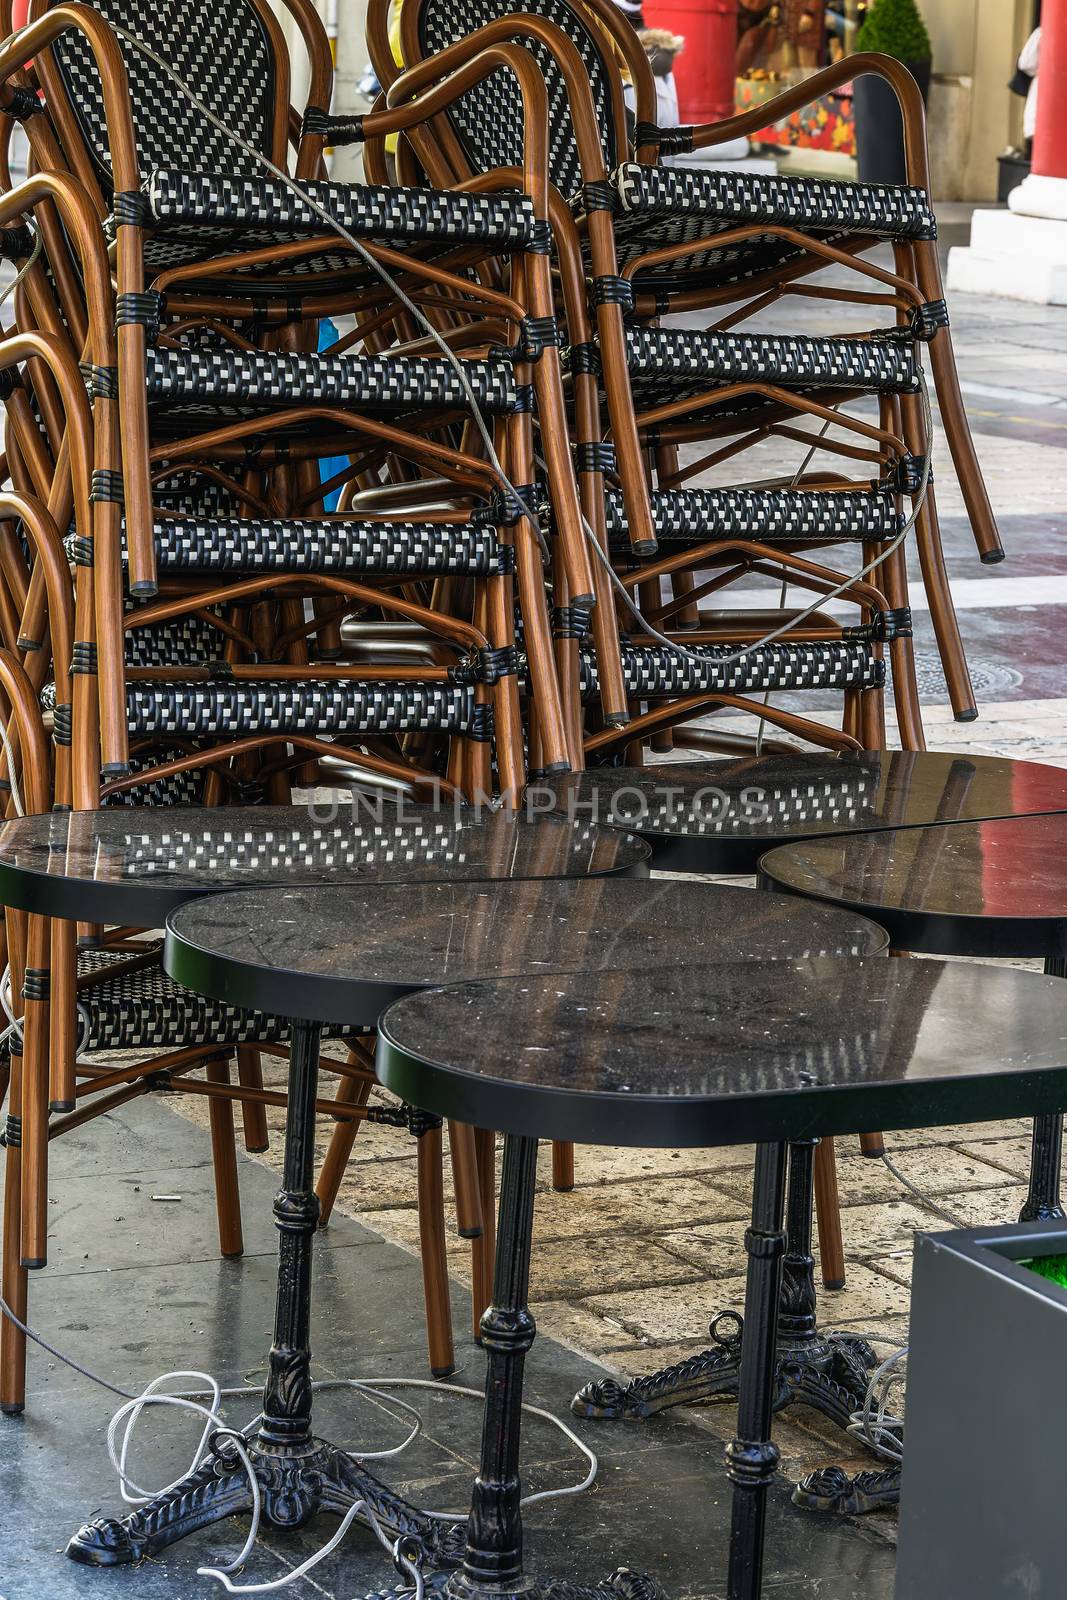 Closed bar restaurants chairs at Aristotelous square in Thessaloniki, after government tries to prevent COVID-19.